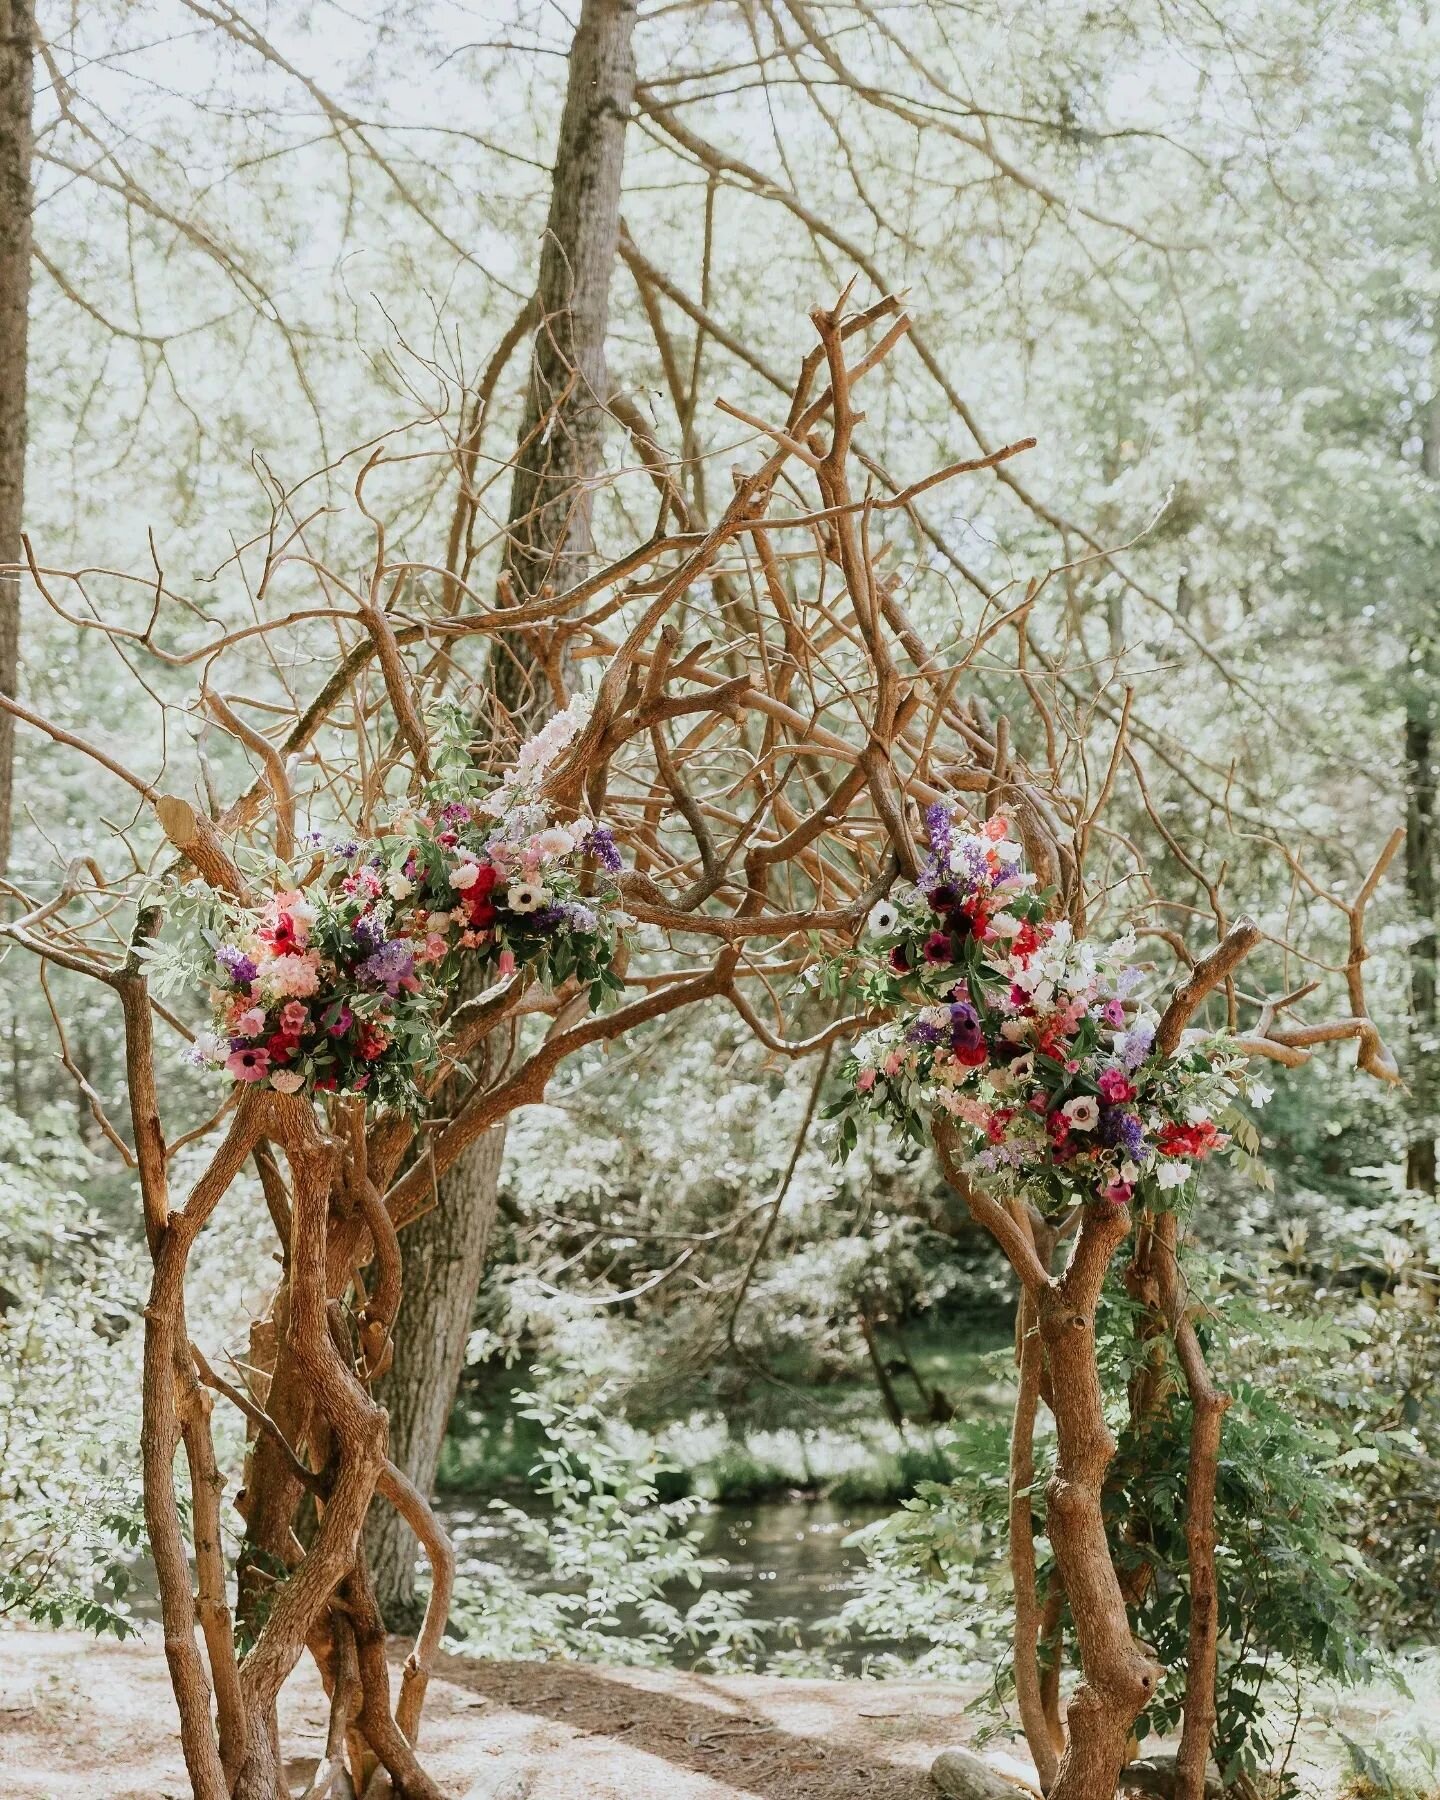 We got to decorate this amazing, truly one of a kind arbor for our good friends this past June. And we got to do it with @hickorygrovegardens gorgeous, local farm grown flowers! It was a real treat and a moment we'll never forget. Swipe to see a clos